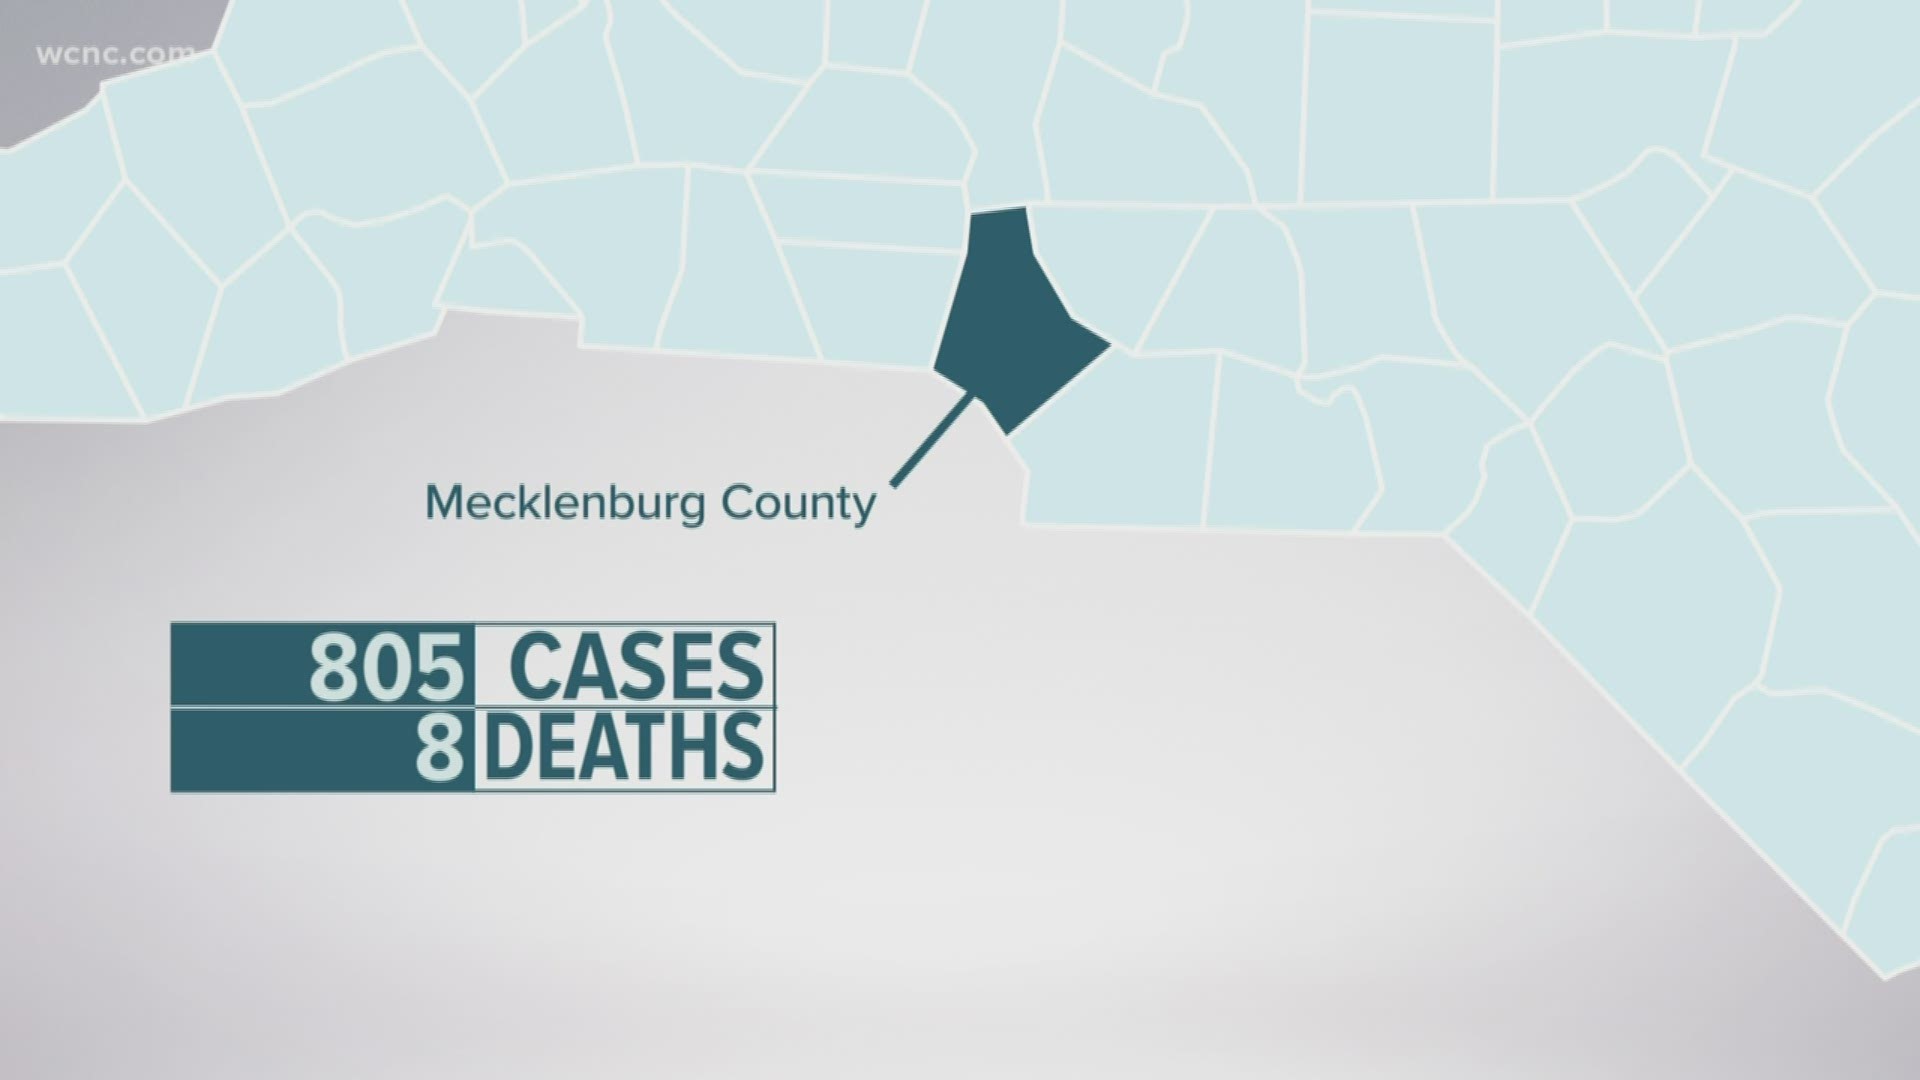 Of the positive coronavirus cases in Mecklenburg County, the majority are within city limits. Mayor Vi Lyles addressed questions that open marks are an issue.